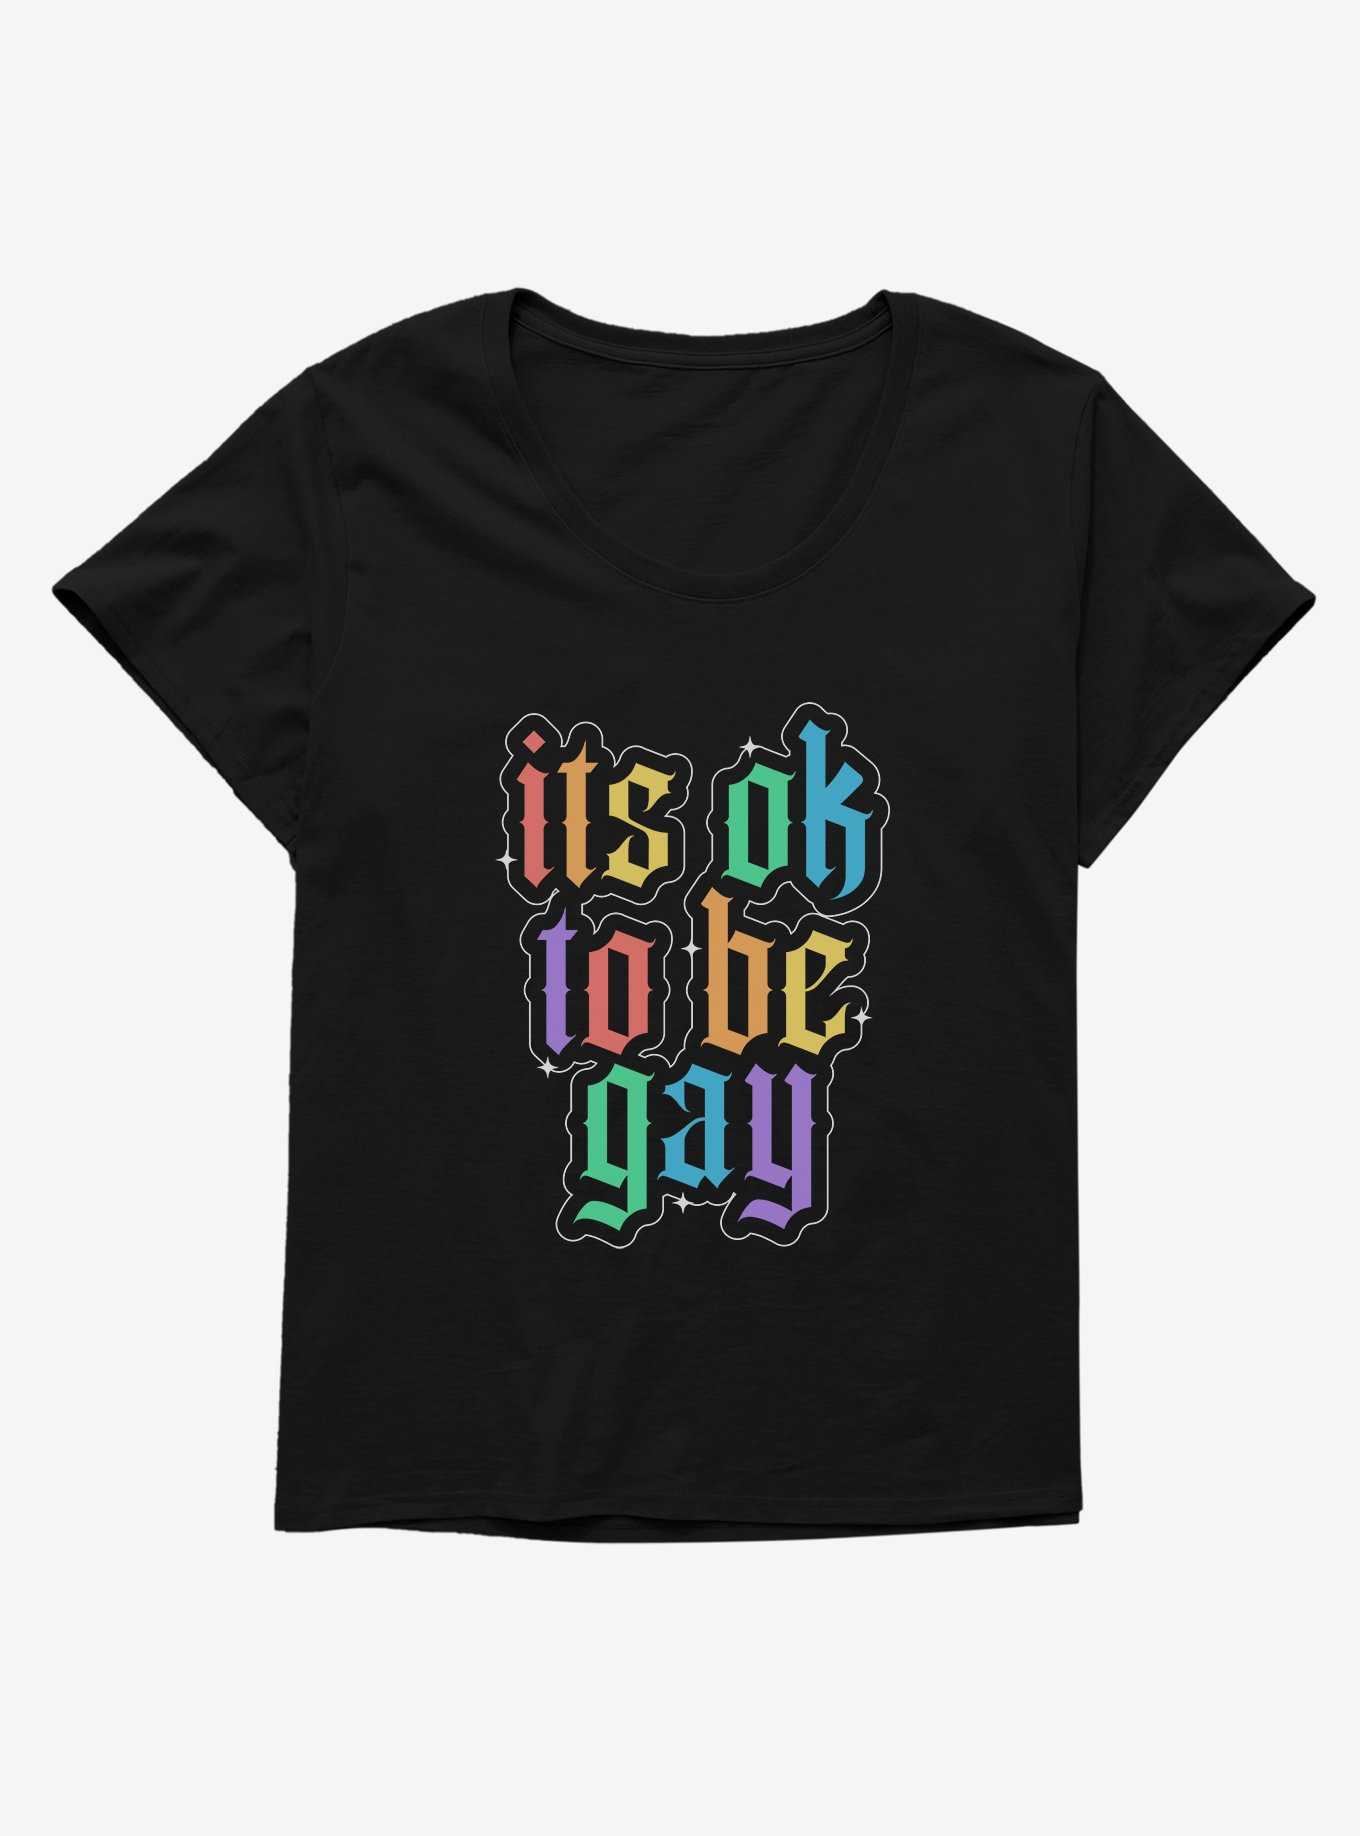 Pride It's Ok To Be Gay Girls T-Shirt Plus Size, , hi-res